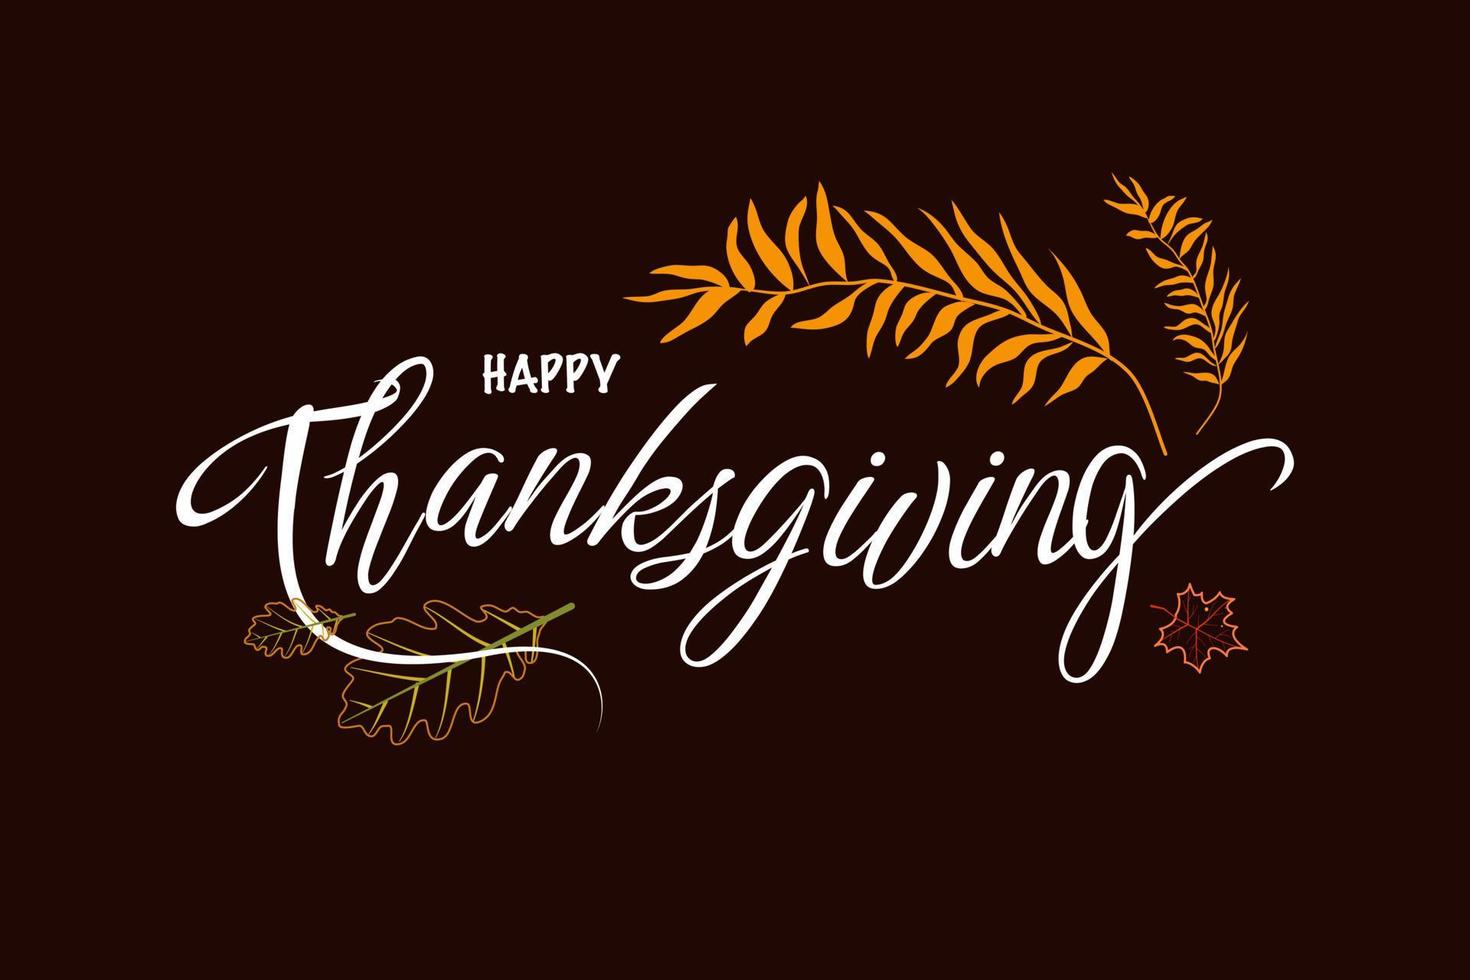 Happy Thanksgiving wish written with elegant calligraphic script and decorated by fallen autumn foliage. Colored seasonal vector illustration in flat style for holiday greeting card, poster card.